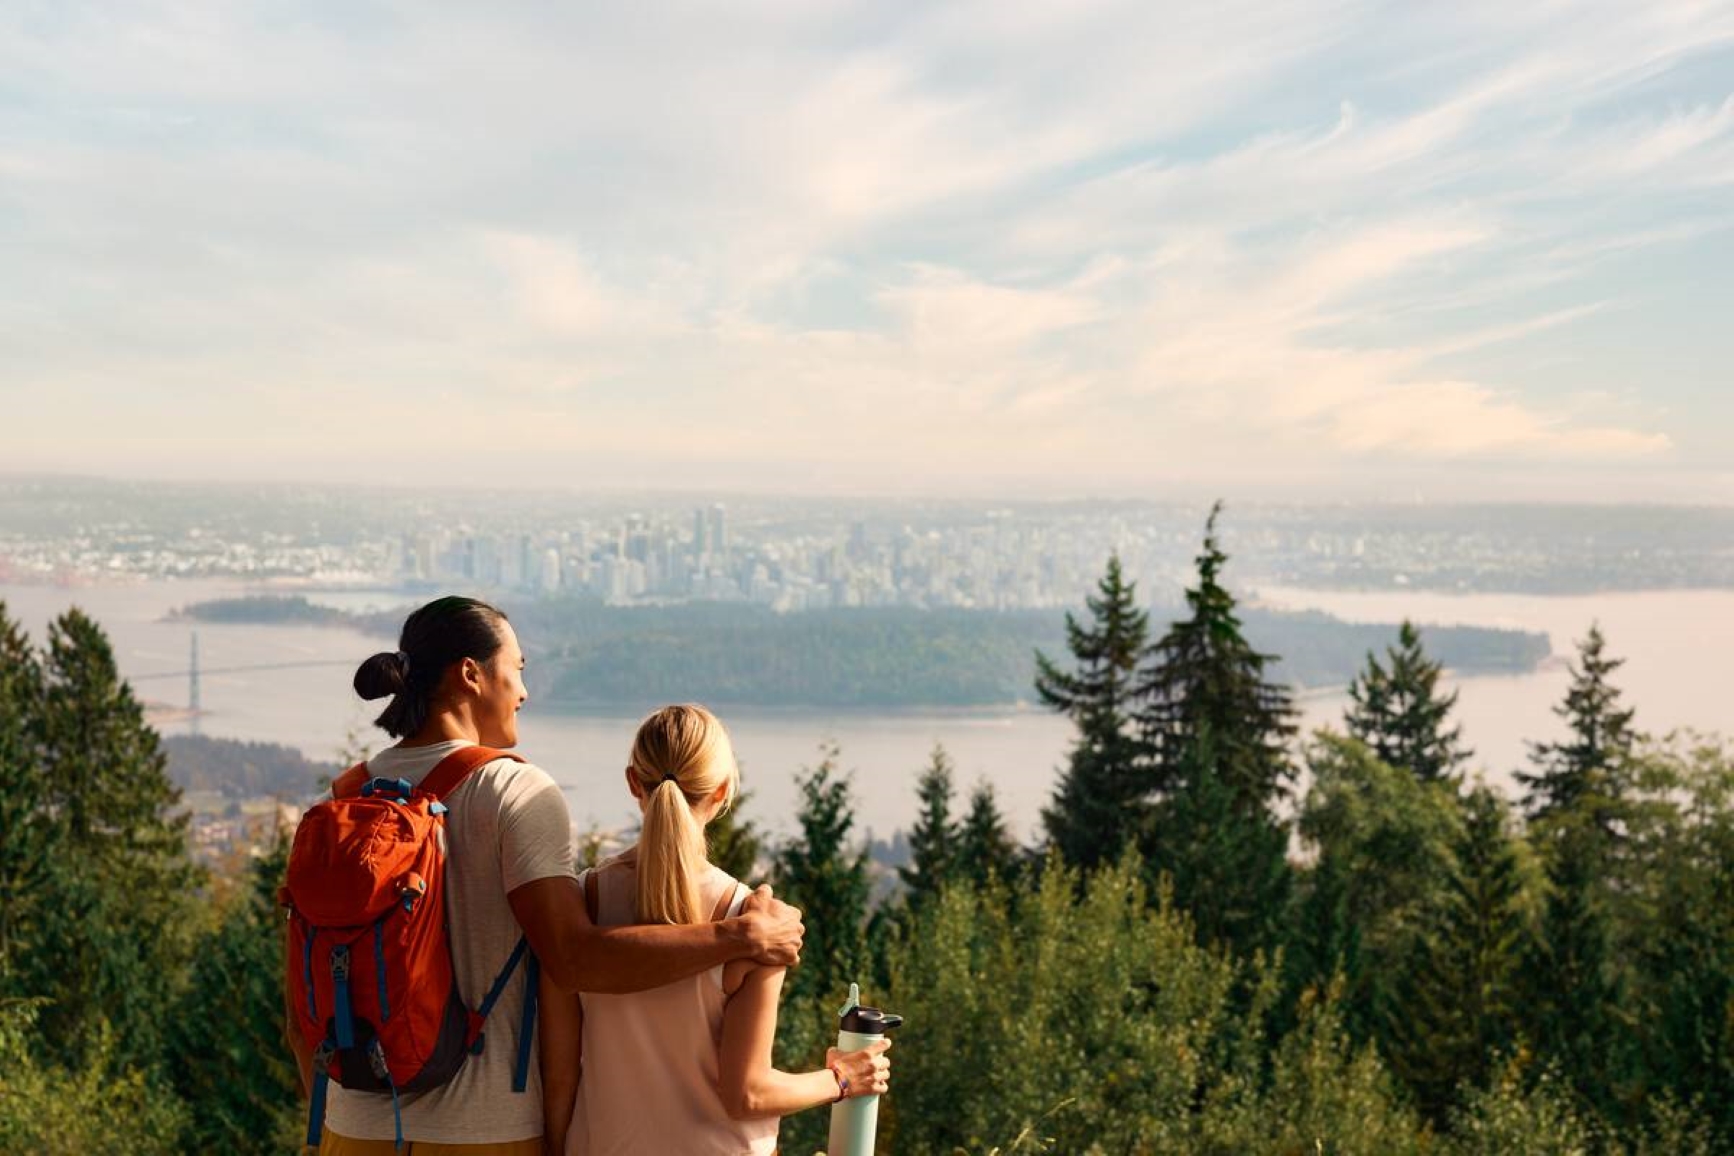 Two park visitors are looking out over to the view of the city in the distance. Photo credit: Destination BC